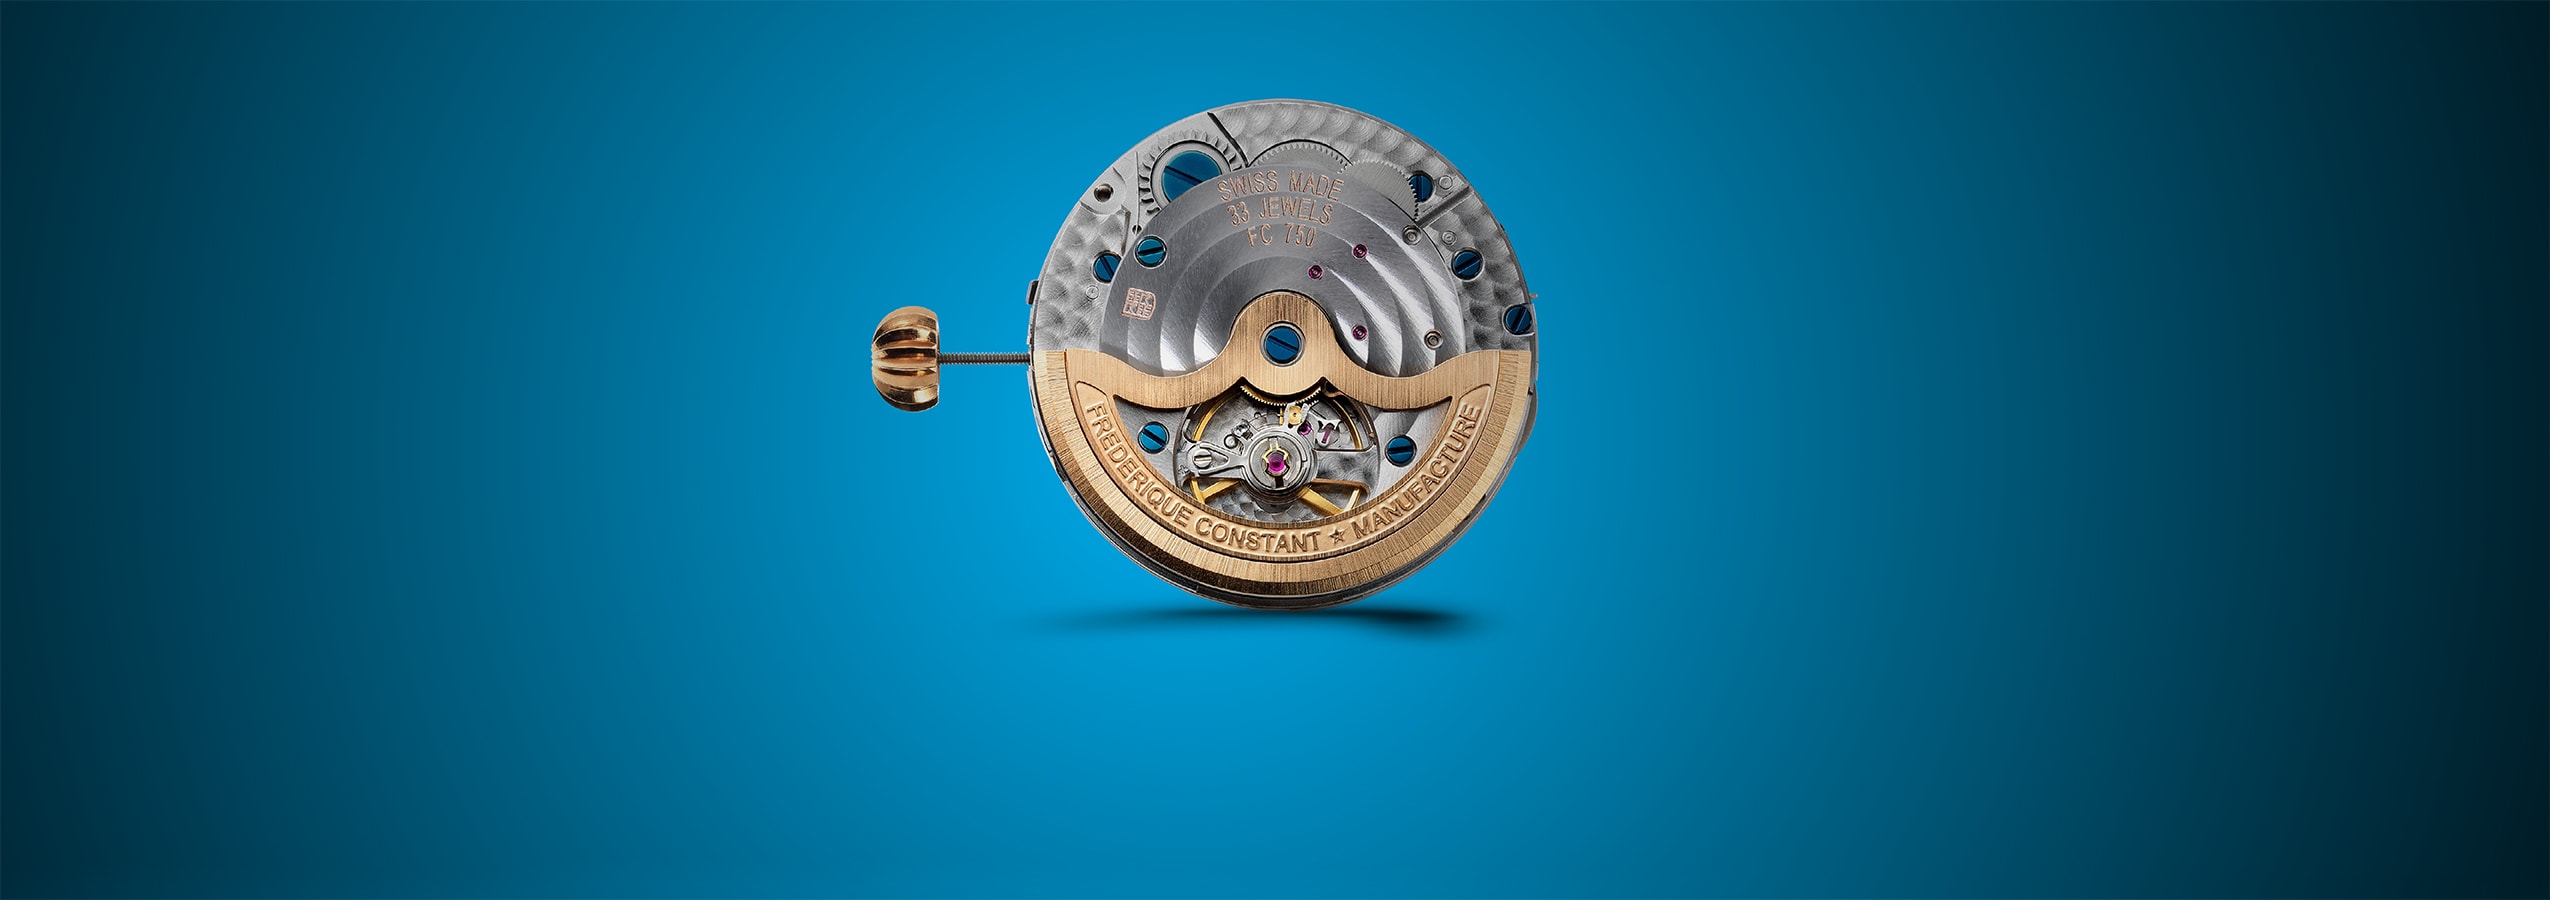 The mechanical part of the FC-750 is an in-house automatic caliber with date, set by the crown at 3 o’clock